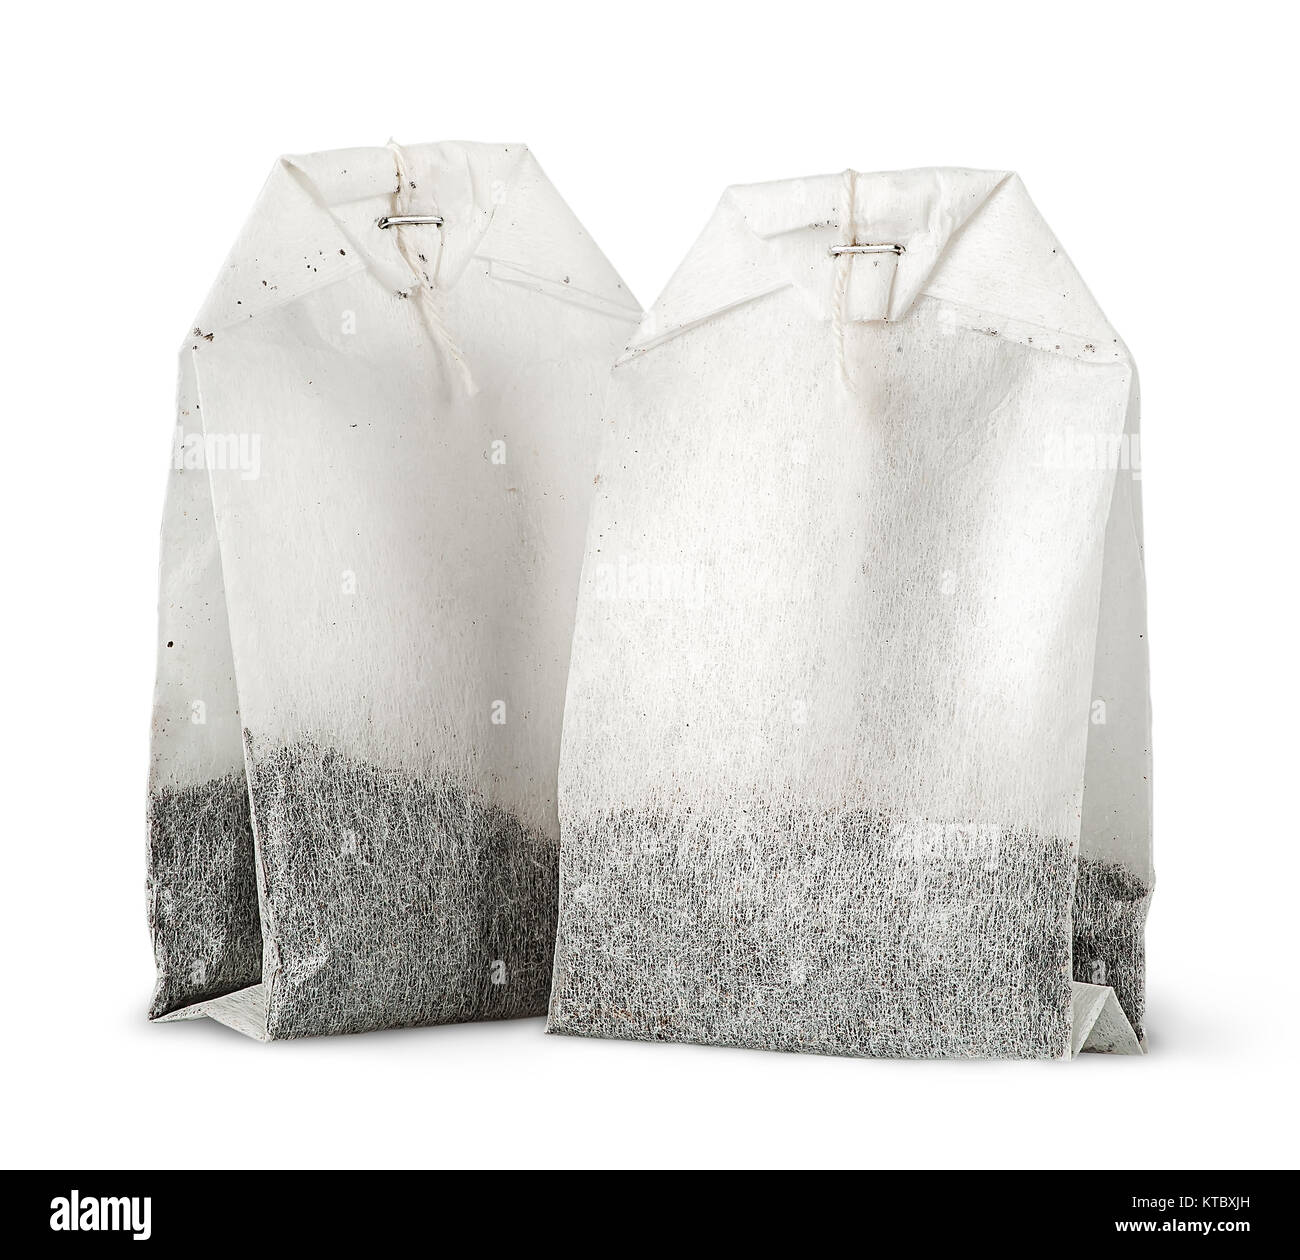 Two tea bags with thread vertically Stock Photo